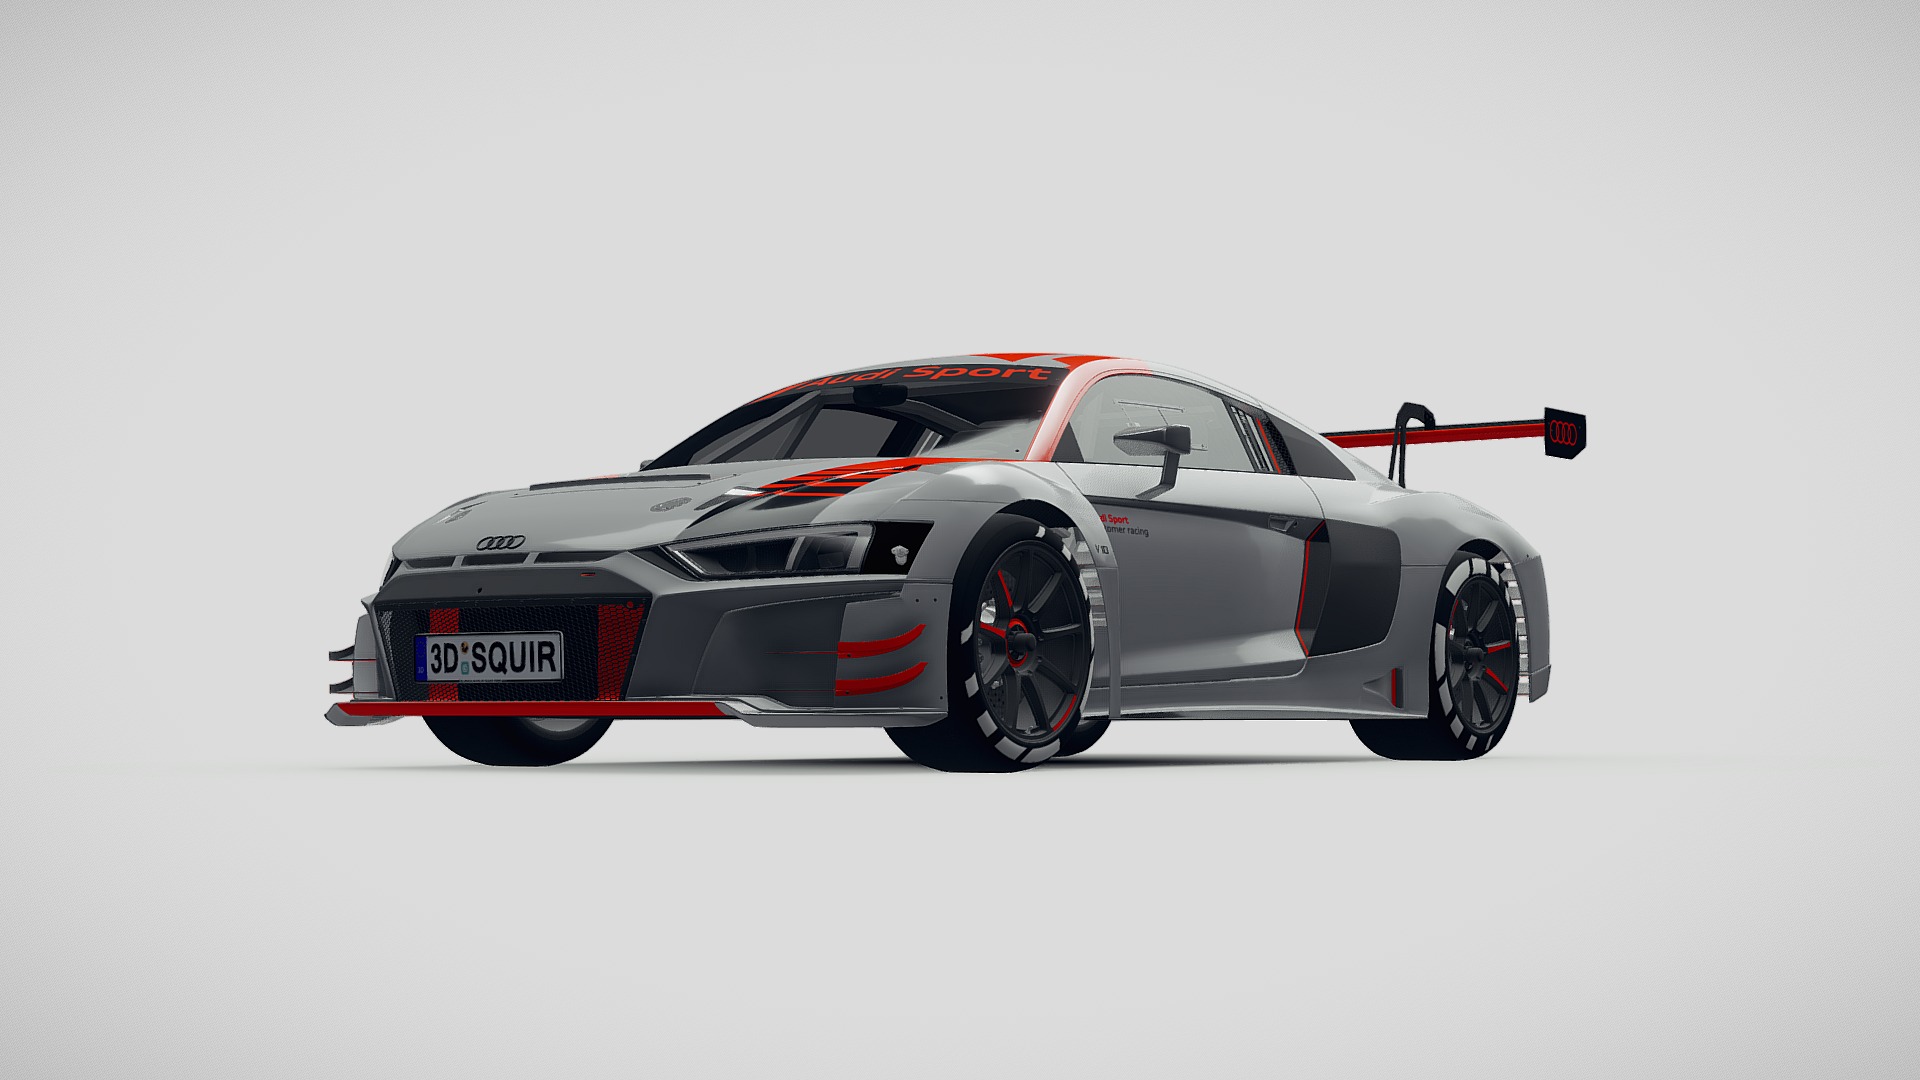 3D model Audi R8 LMS GT3 2020 - This is a 3D model of the Audi R8 LMS GT3 2020. The 3D model is about a race car with red stripes.